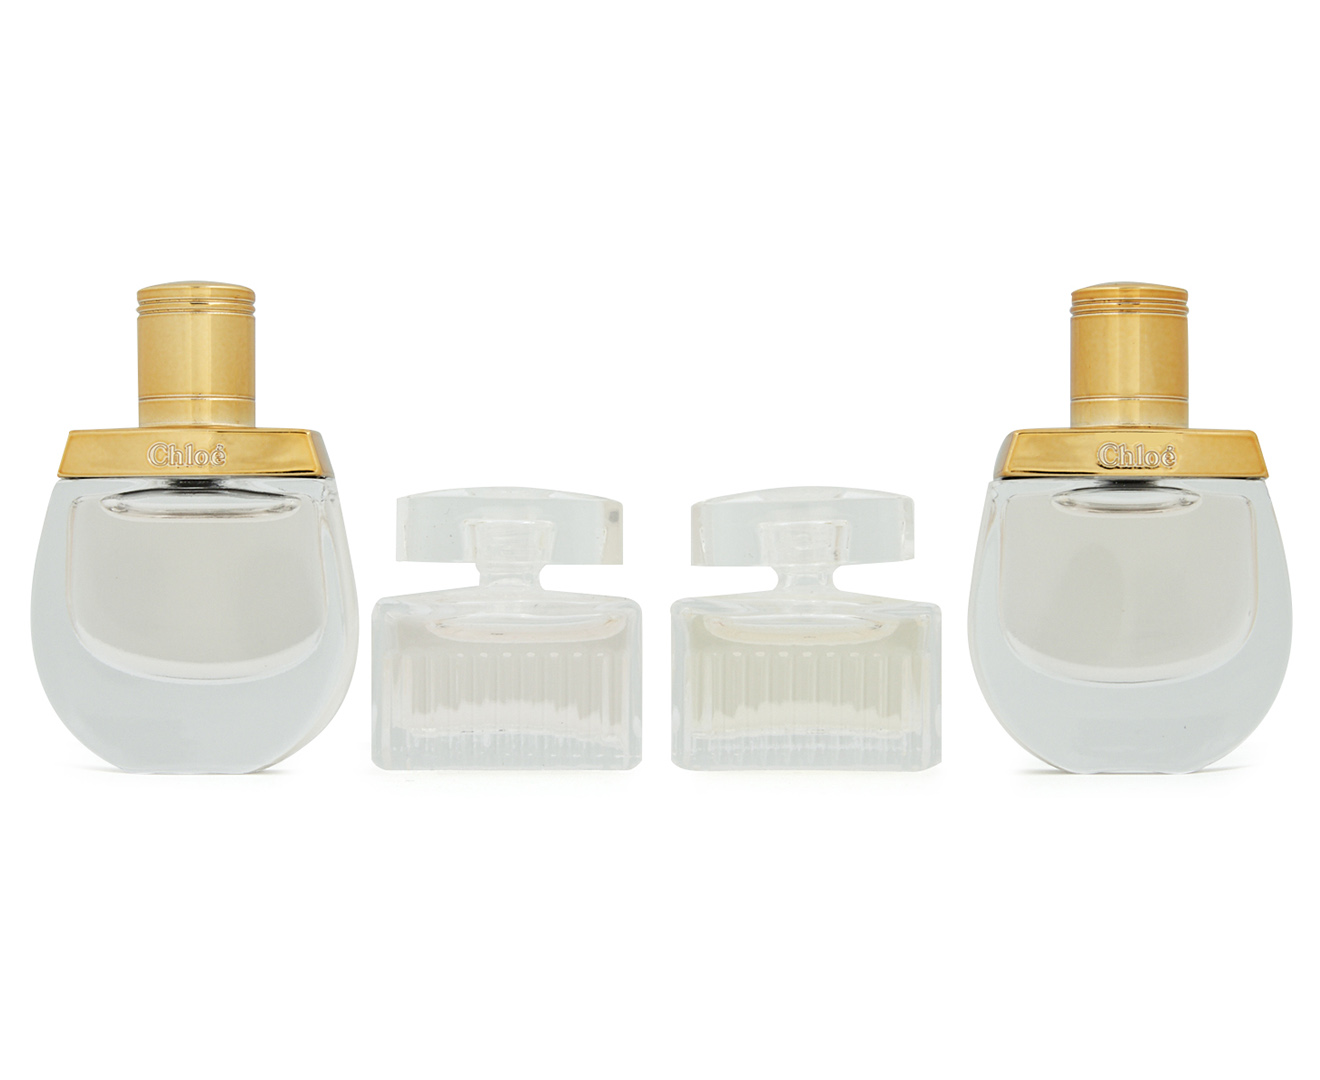 Chloé Nomade For Women 4Piece Perfume Gift Set Catch.co.nz